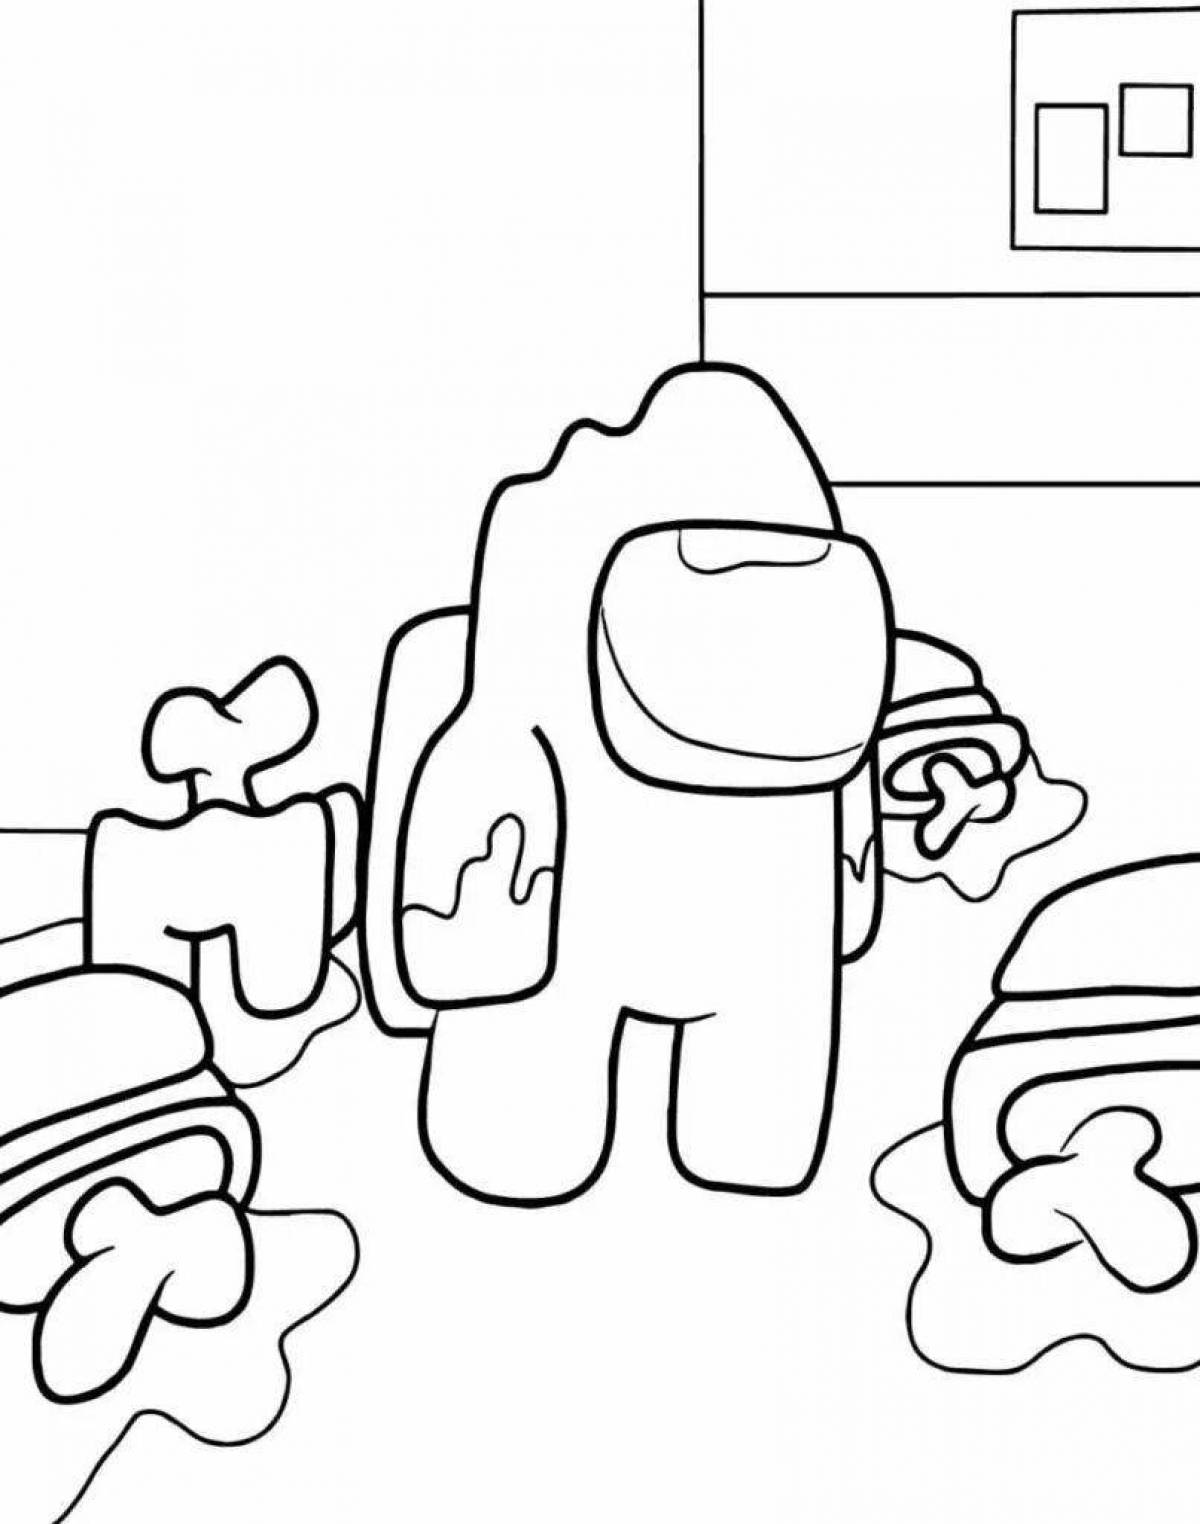 Intriguing traitor coloring page